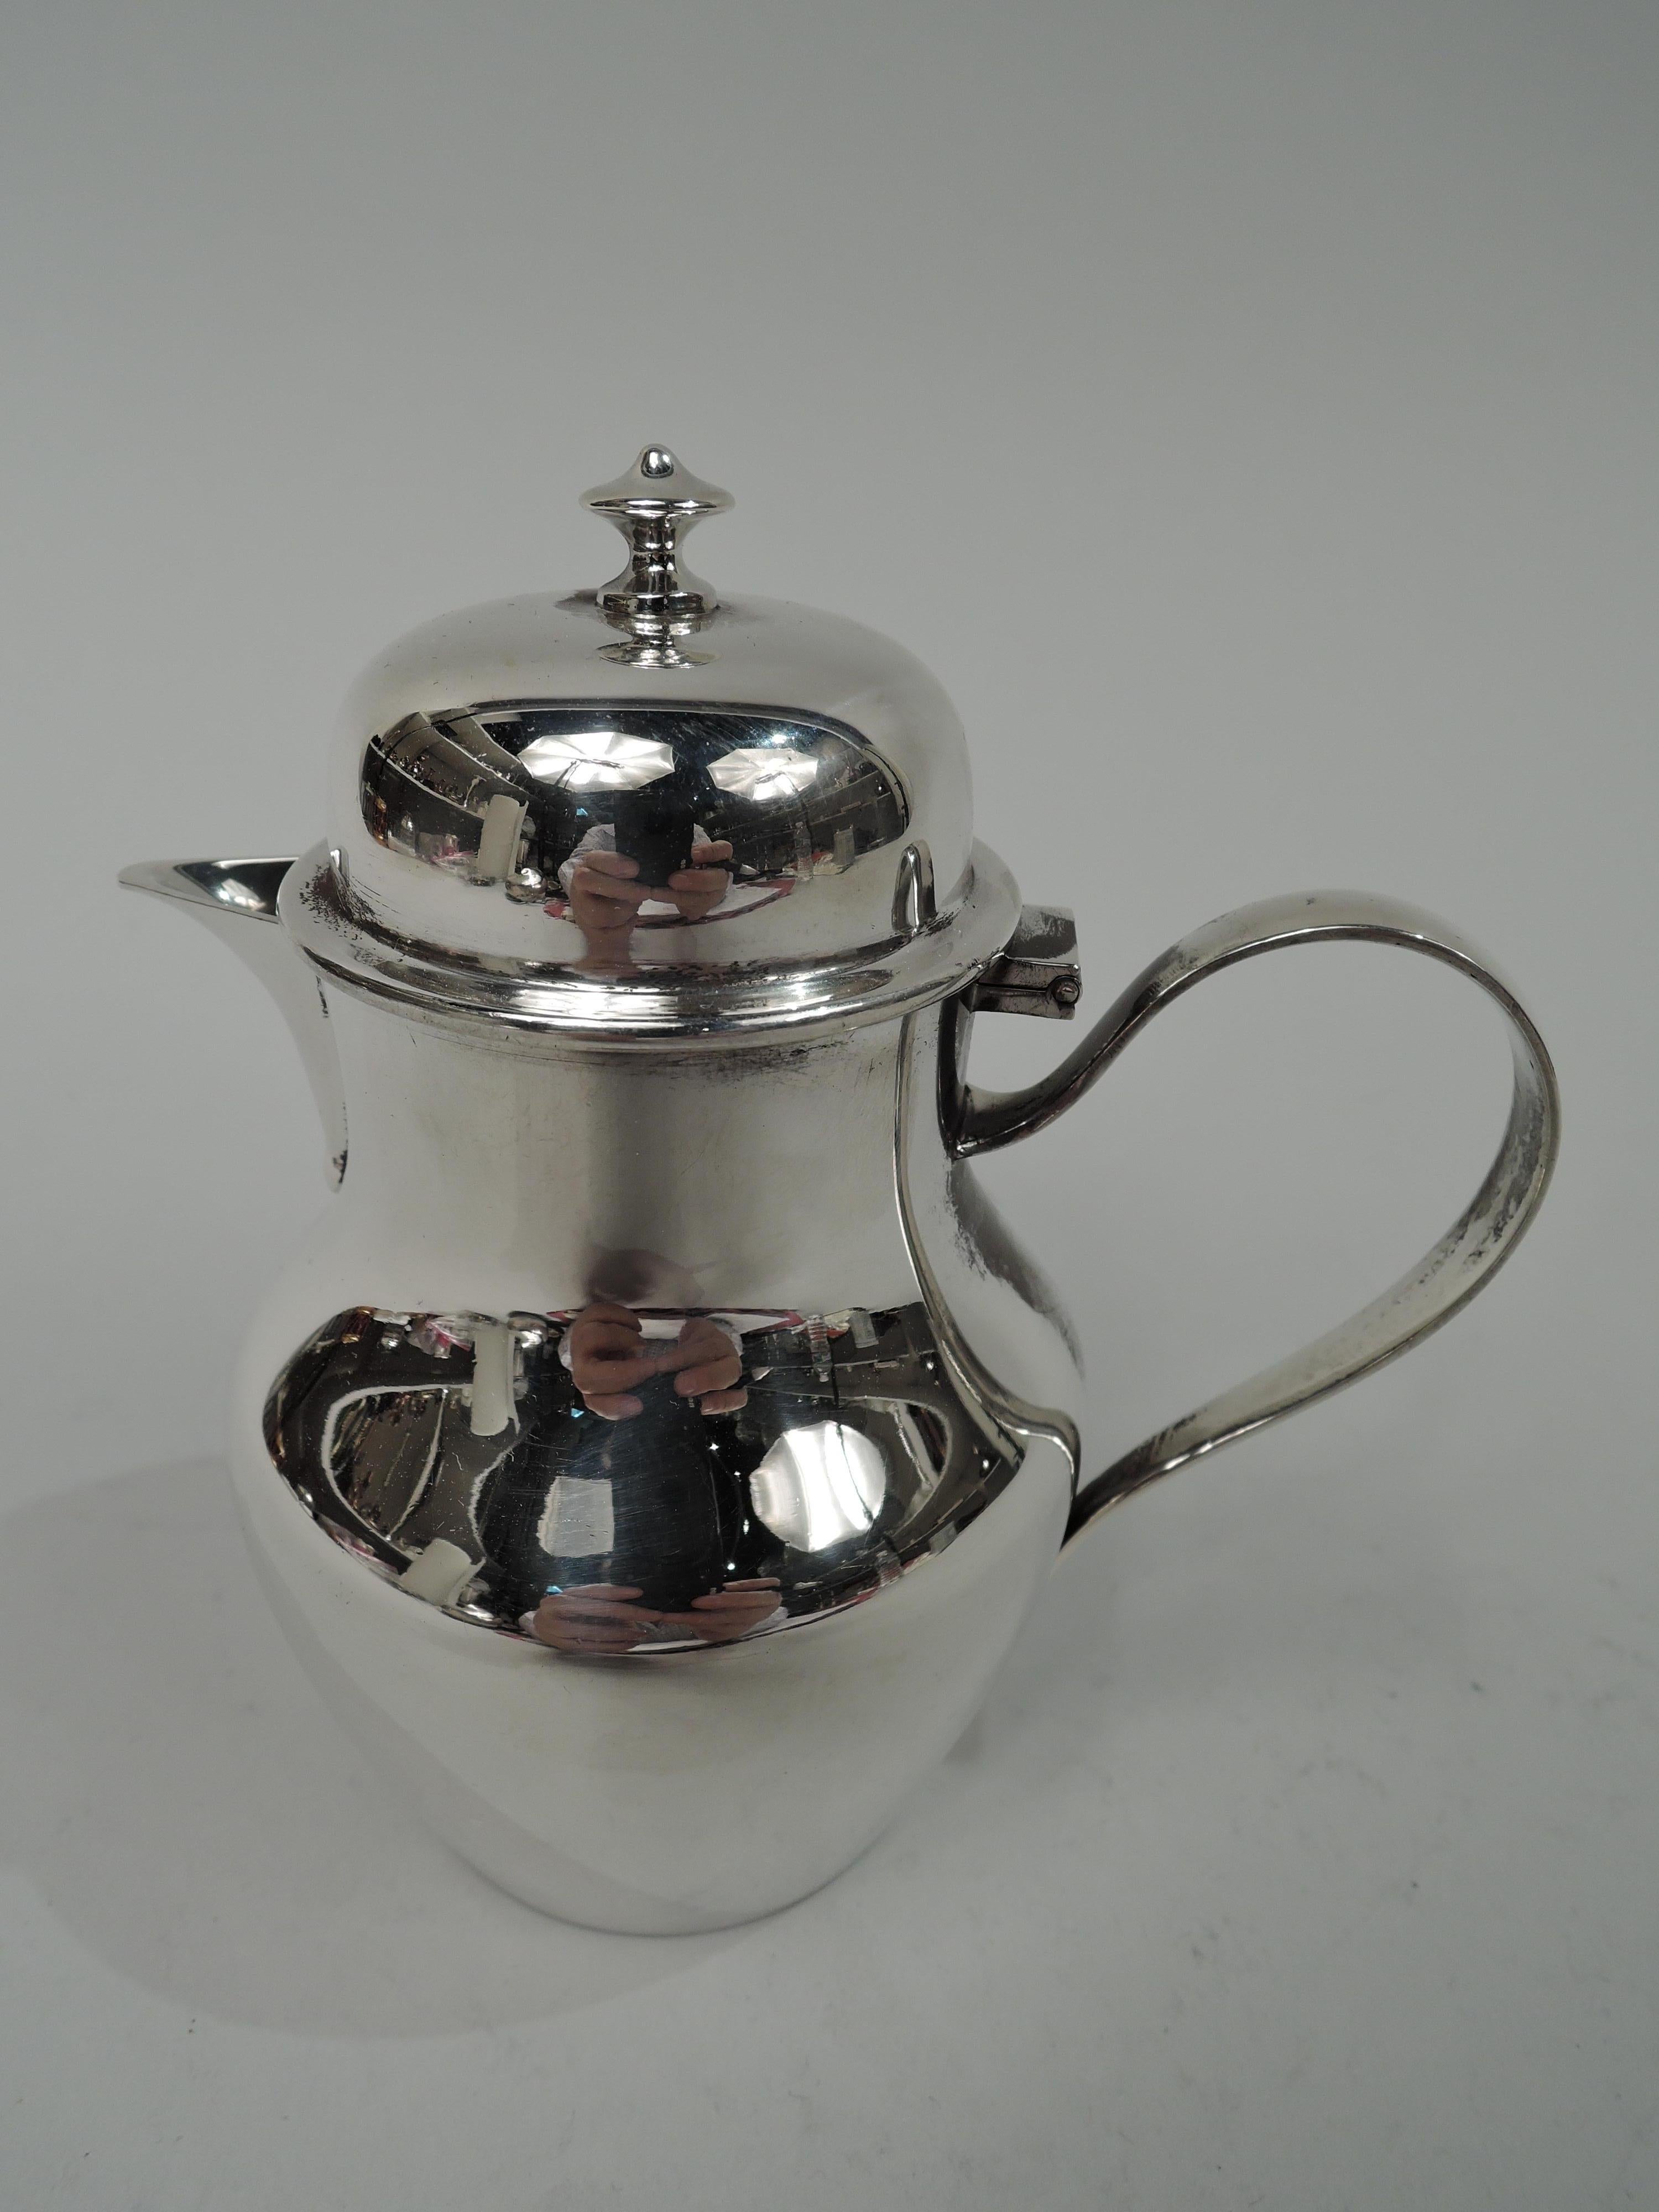 Traditional Georgian sterling silver creamer. Made by Ensko in New York. Baluster body with v-spout and high-looping handle. Cover hinged and domed with vasiform finial. Fully marked including maker’s stamp and no. 126. Weight: 6.2 troy ounces.